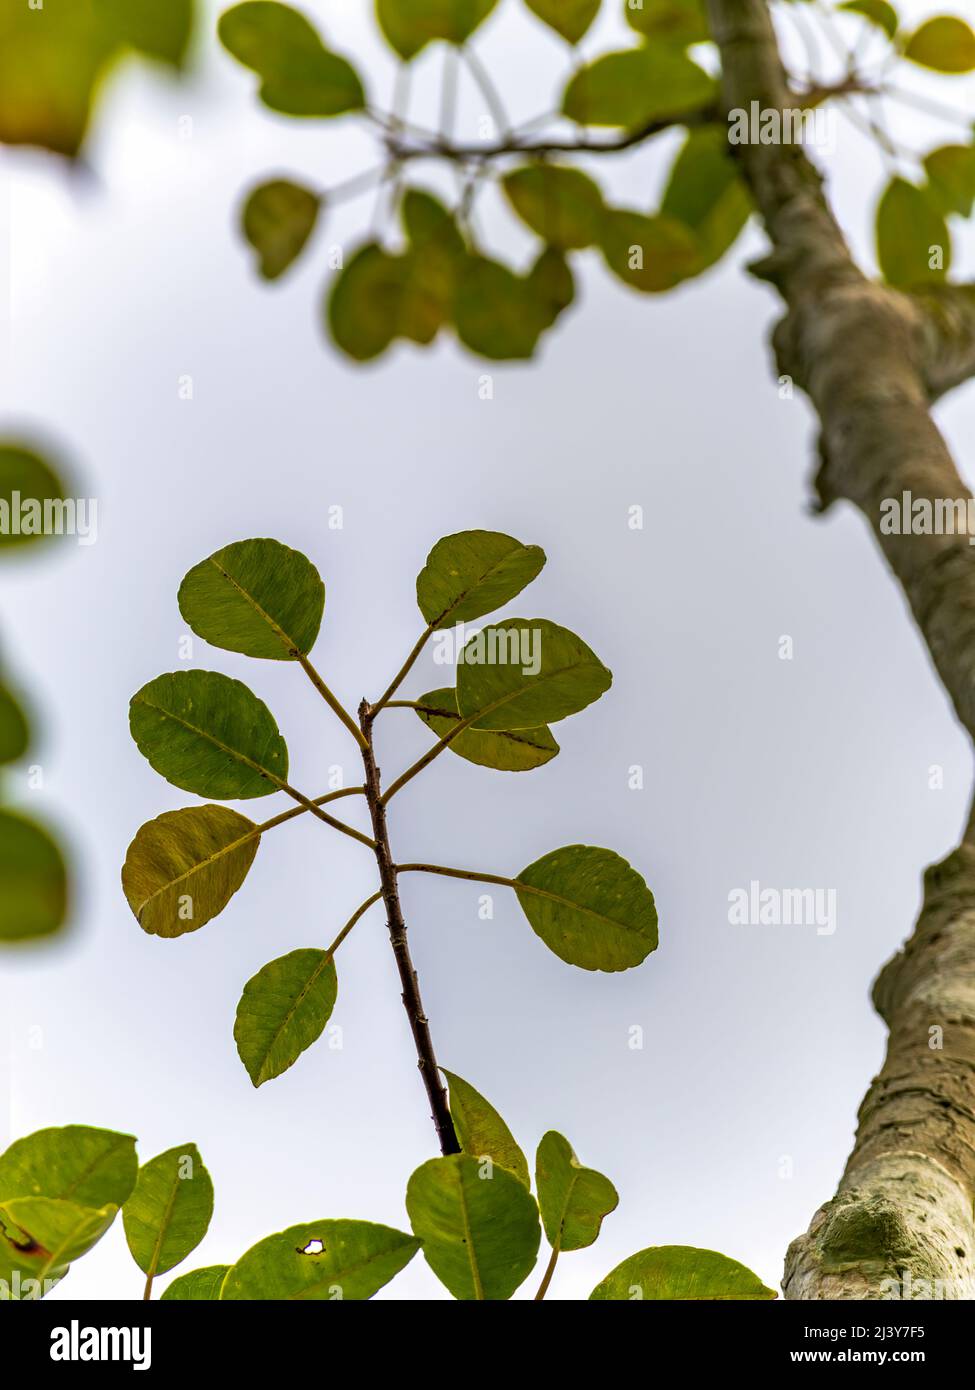 Bottom-Up Photo of a twig with leaves in focus on a tree in the background Stock Photo